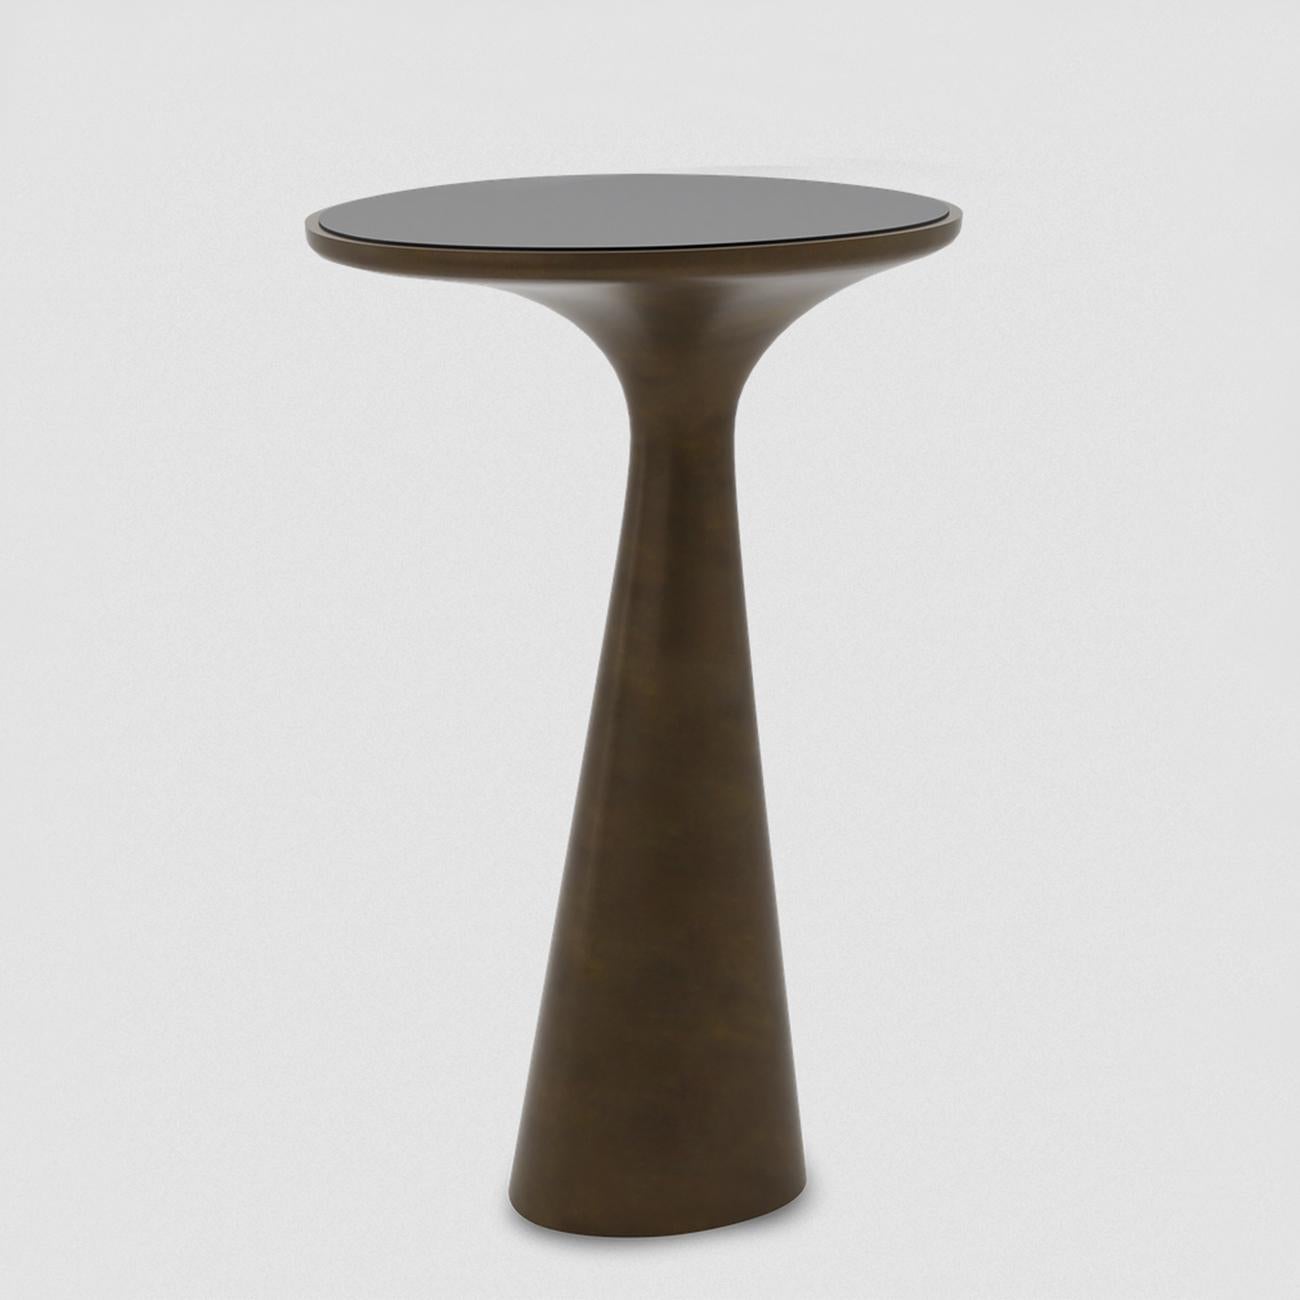 Side Table Perone with strong resin base in 
Aged bronzage finish. With a black glass top.